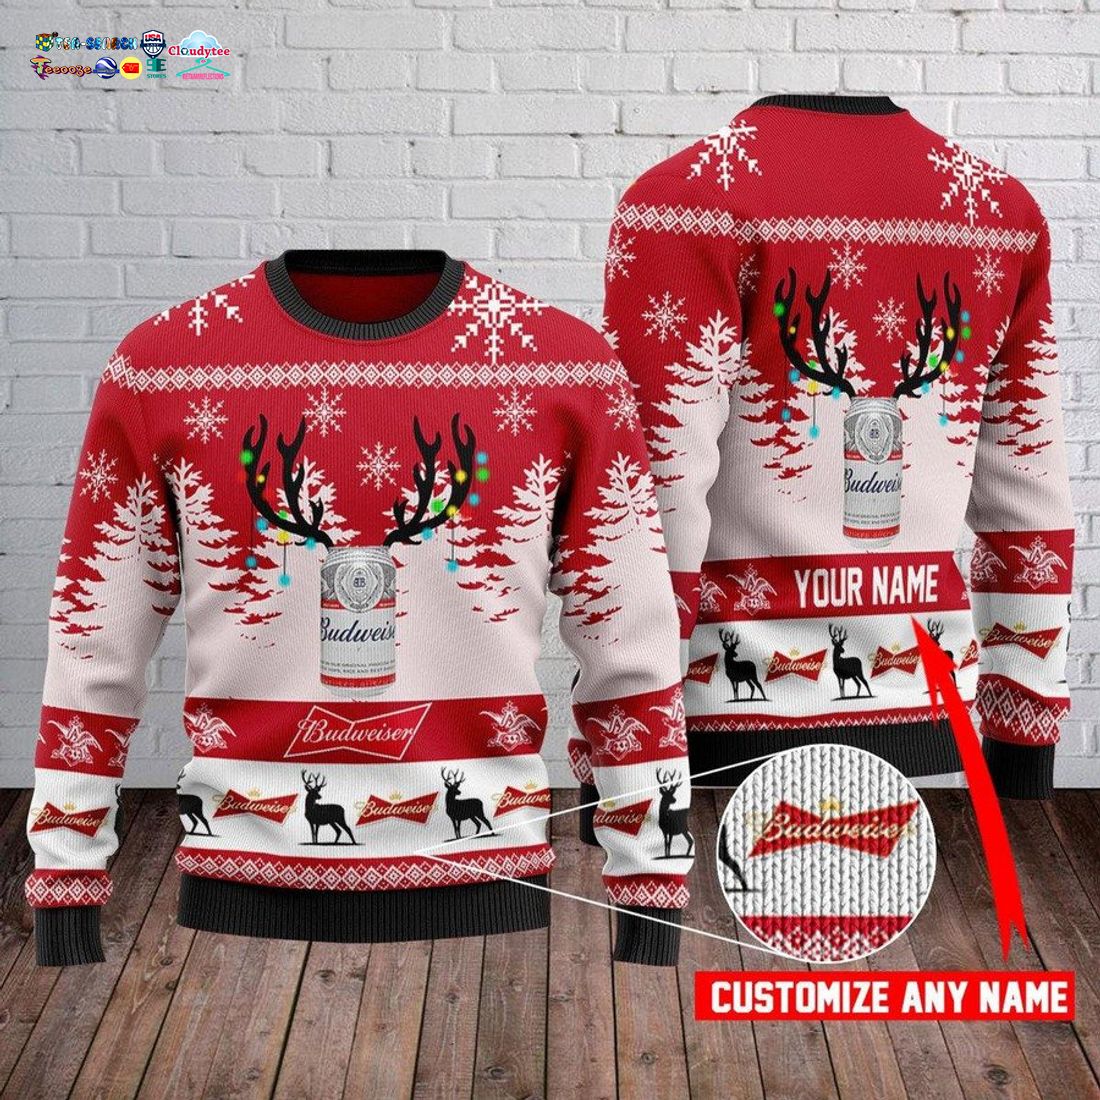 personalized-name-budweiser-ver-3-ugly-christmas-sweater-1-1hgxp.jpg